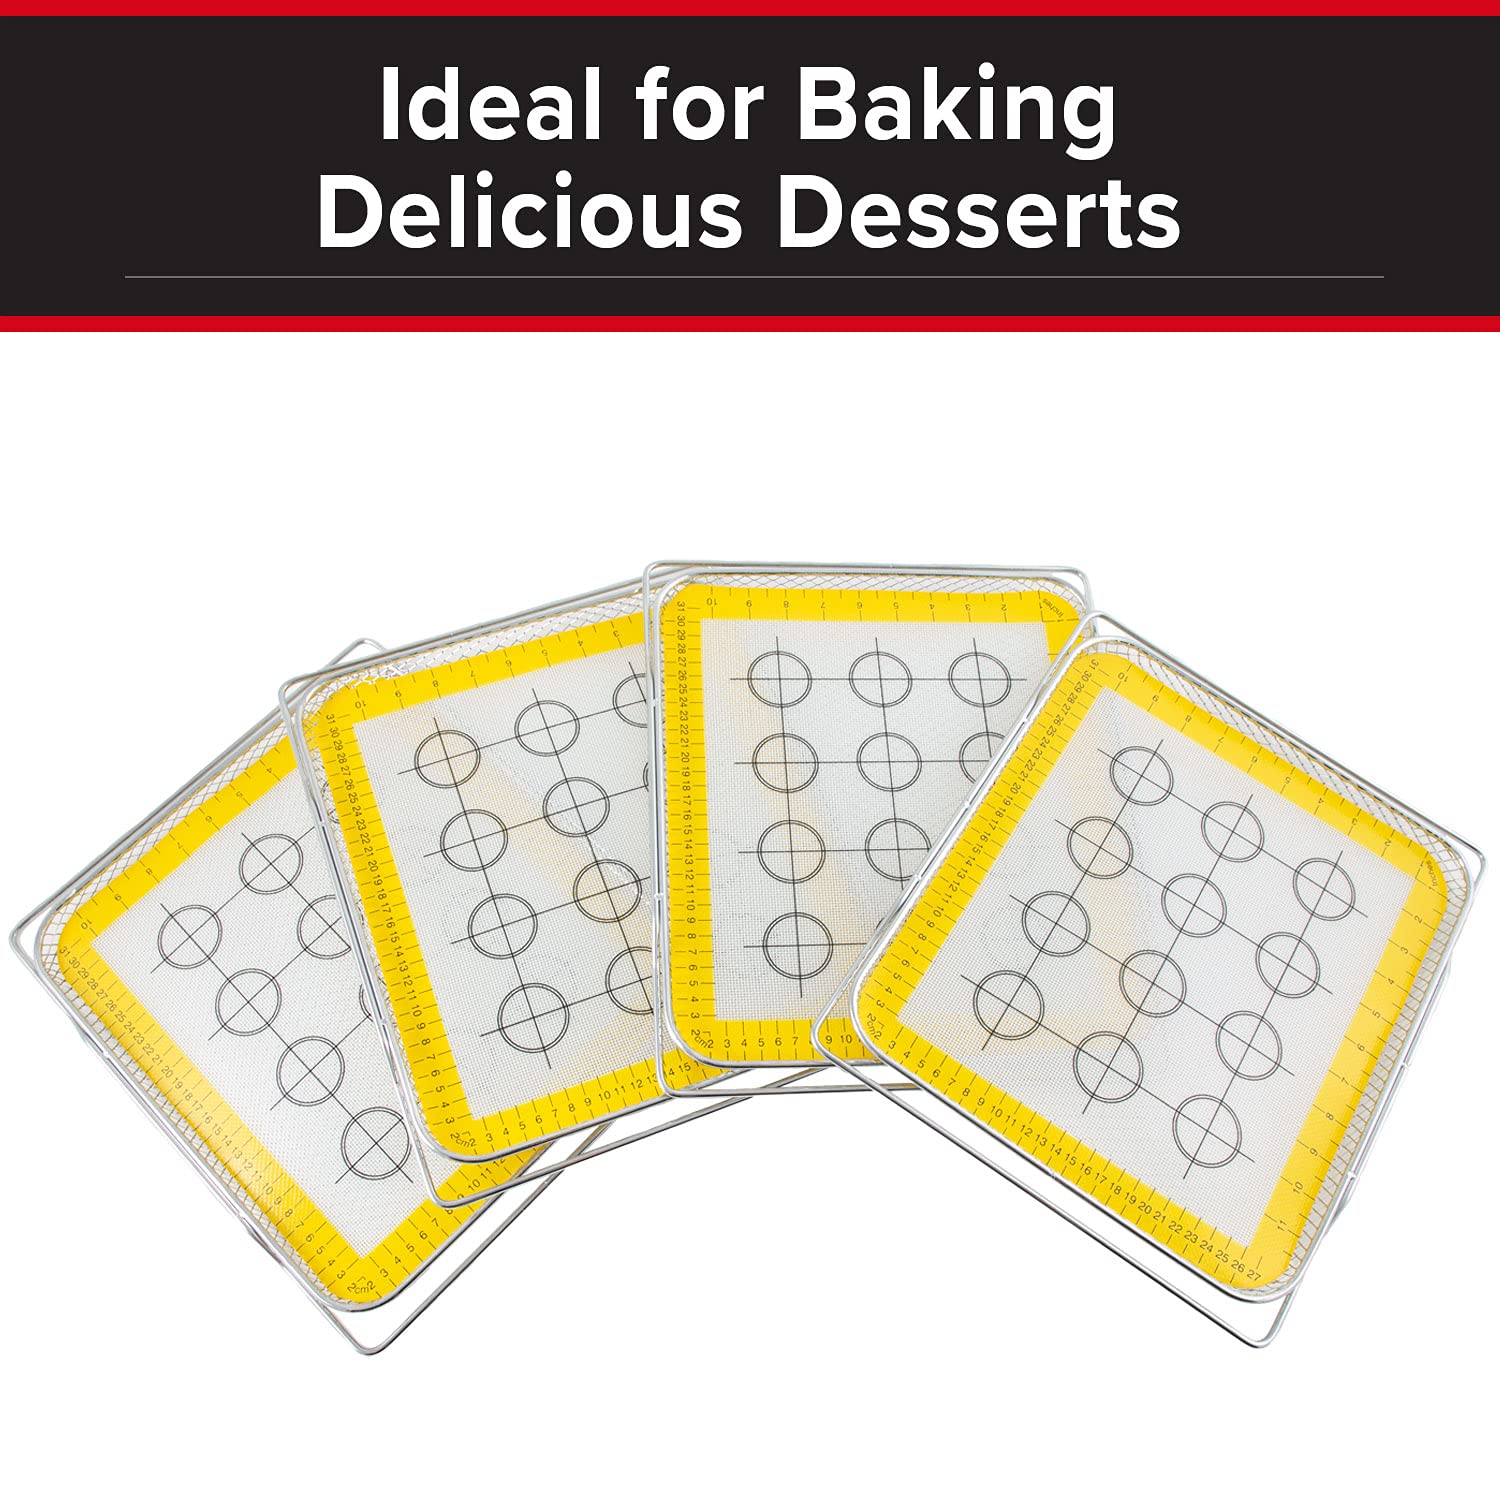 NUWAVE Genuine 9-Piece Ultimate Baking Kit, 1.3” Deep SS Roasting Tray, 4 SS Racks, 4 - 11.5”x13” Silicone Baking Mats, Compatible w/ All Bravo XL Air Fryer Oven Models 20801,20802, 20811, 20850